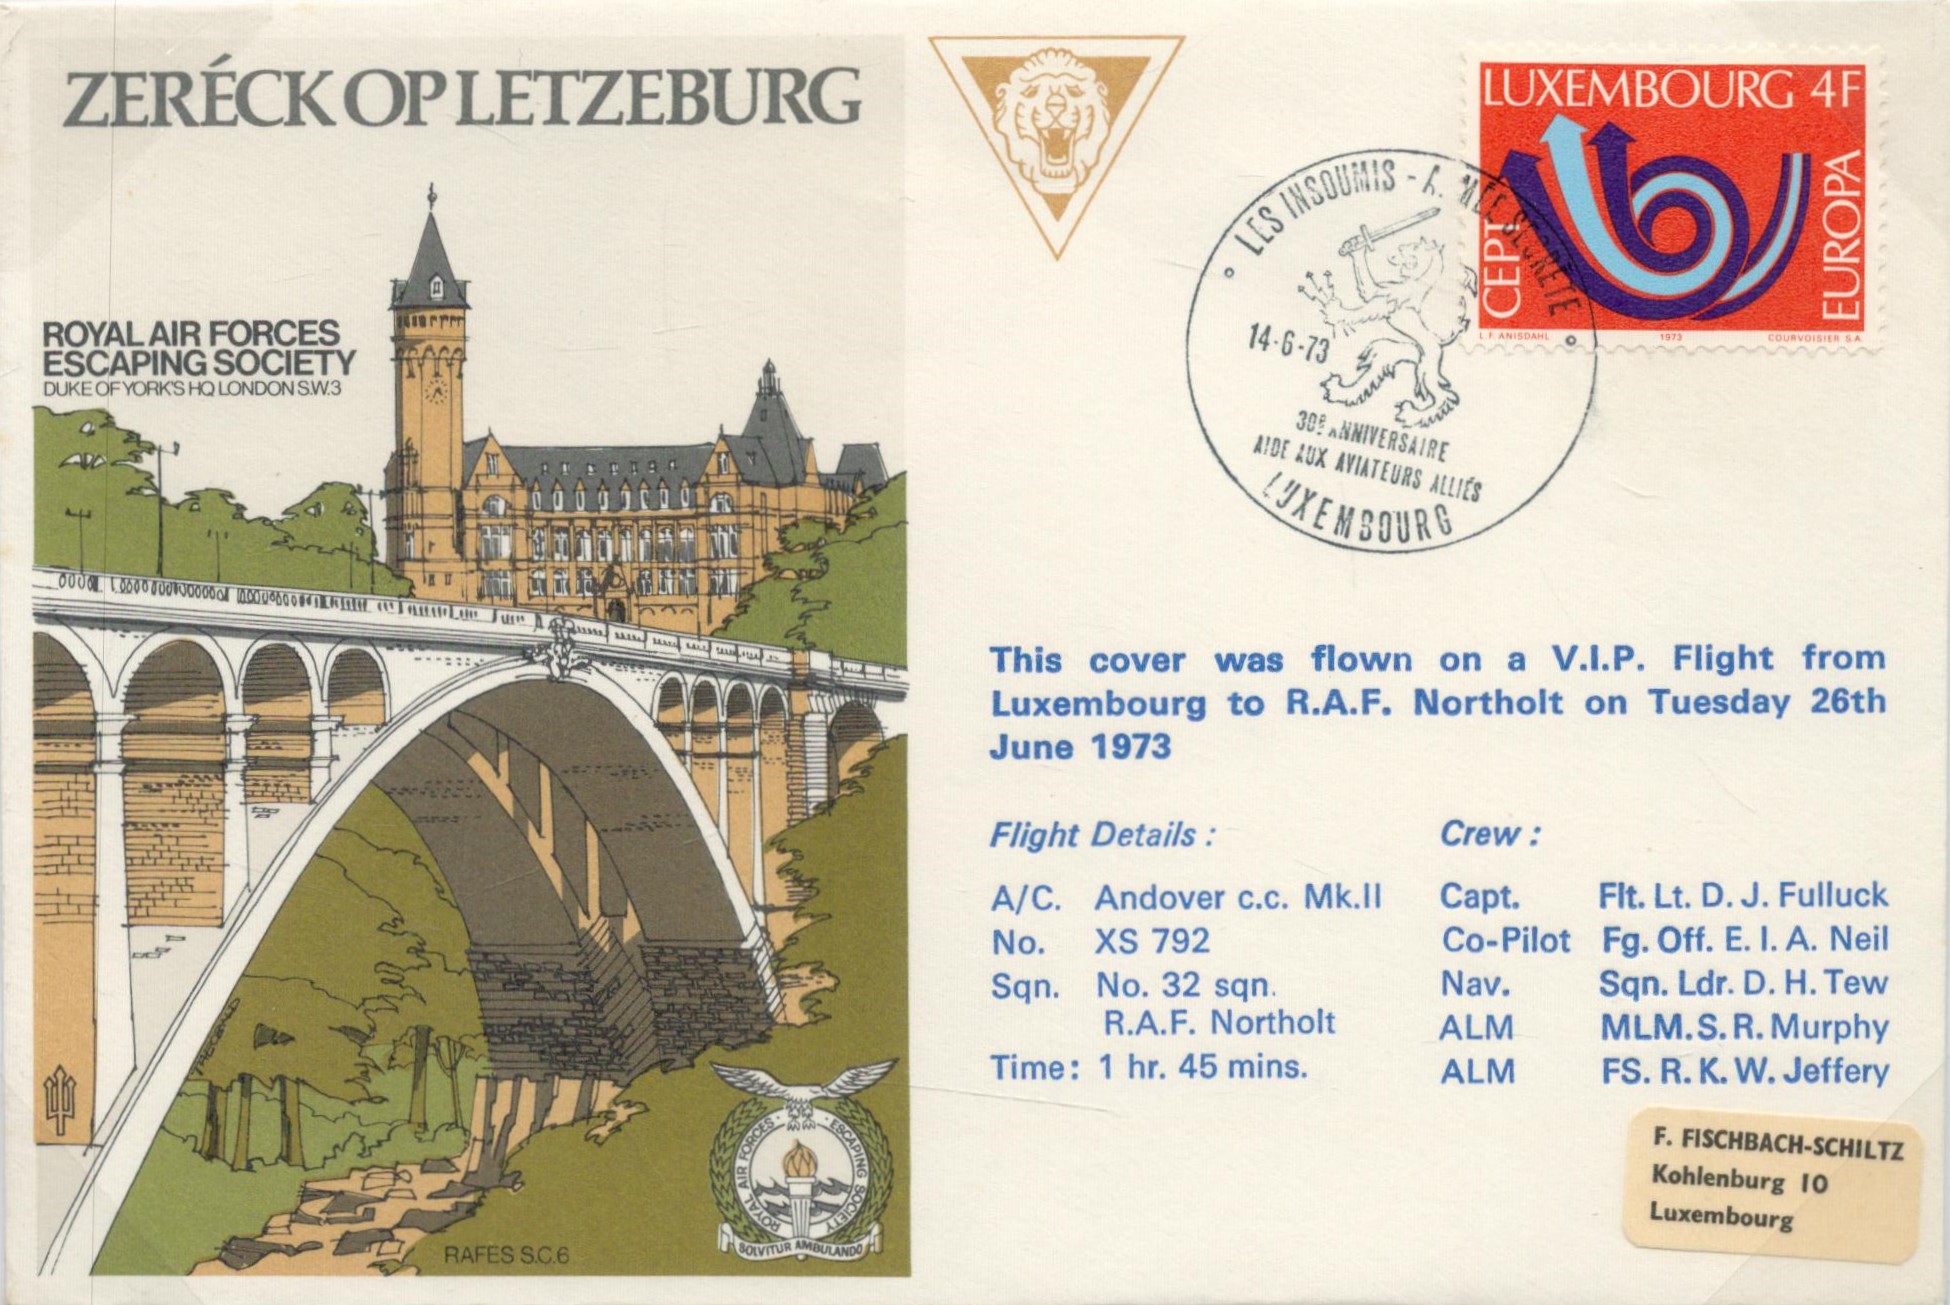 RAFES SC6 Zereck op Letzeburg Flown FDC (Royal Air Forces Escaping Society) with 4F Luxembourg Stamp - Image 2 of 4